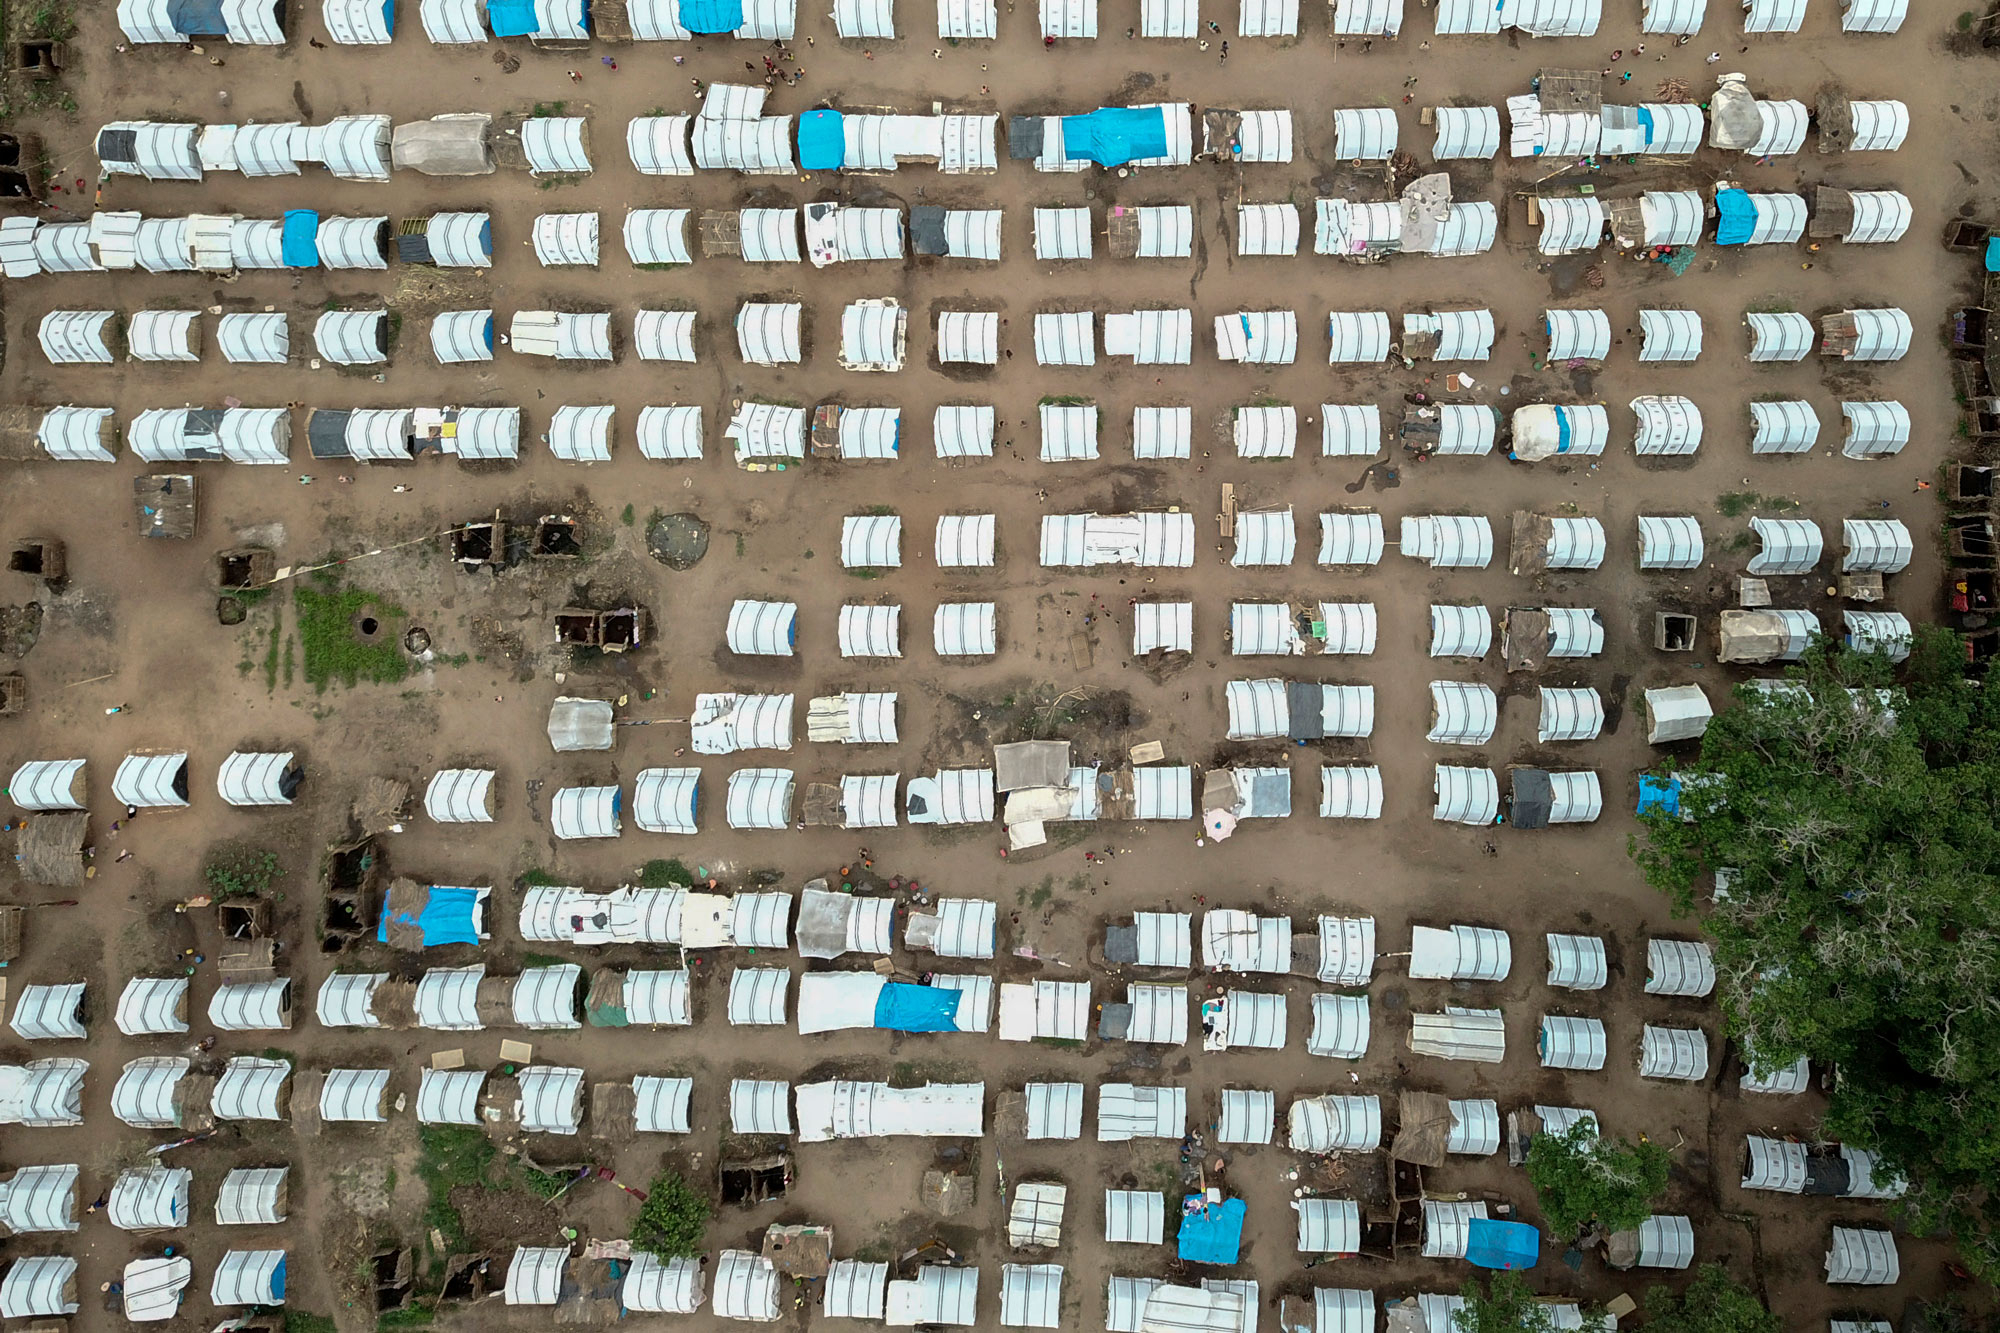 24 February 2021: An aerial view shows temporary housing for displaced people in the Napala Agrarian Center in the Metuge district in Cabo Delgado, Mozambique. (Photograph by Alfredo Zuniga/ AFP)